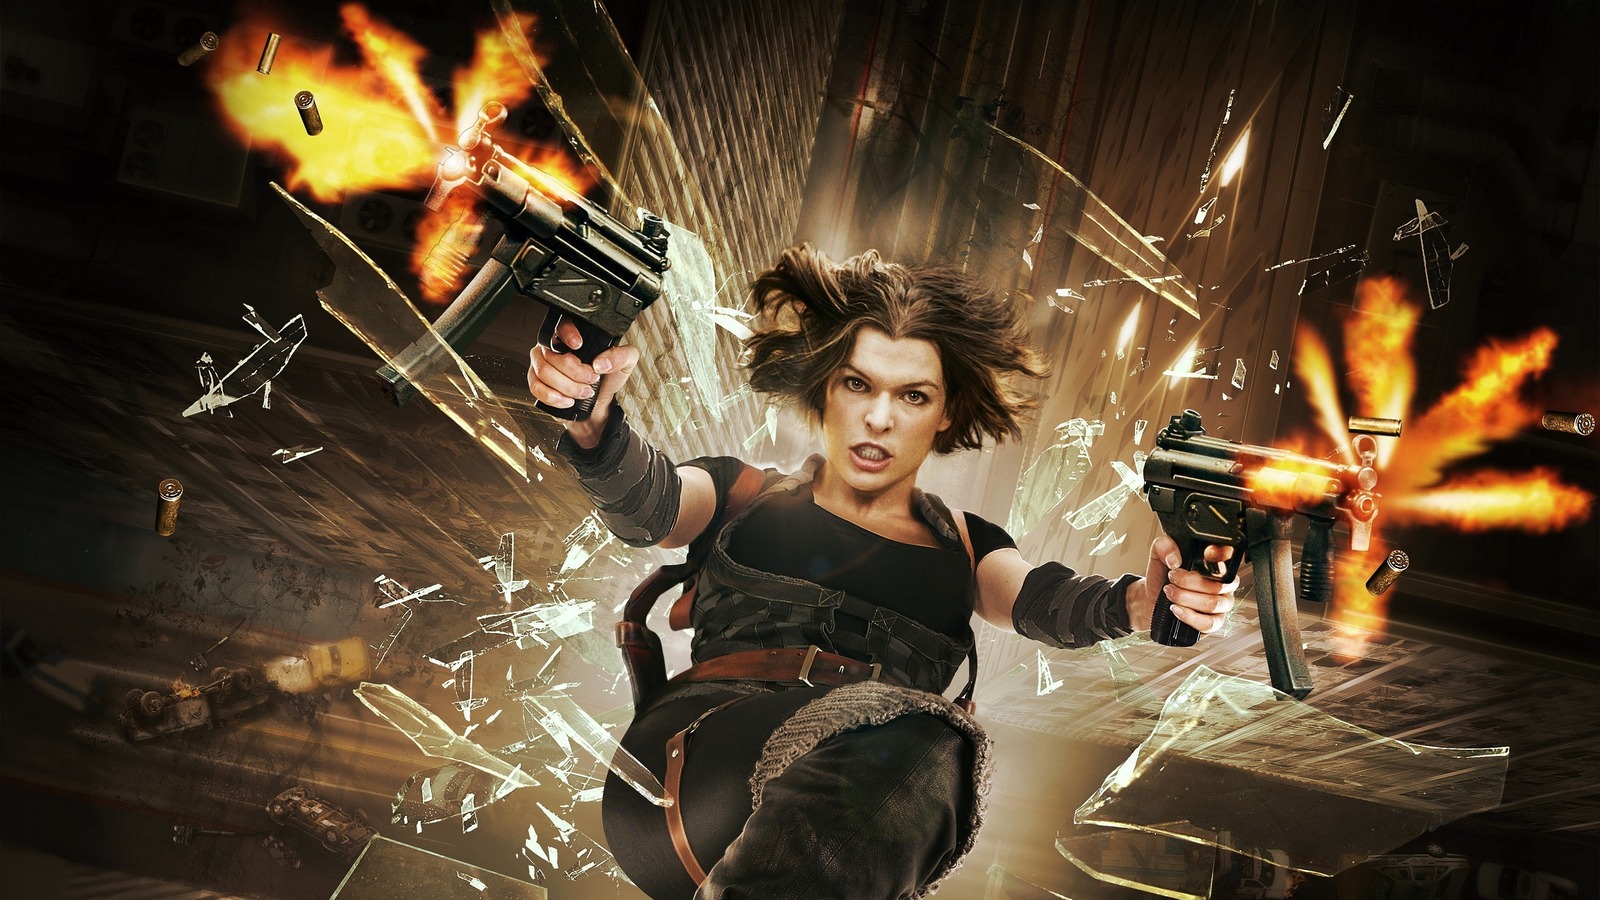 Paul W.S. Anderson Talks Resident Evil: Final Chapter